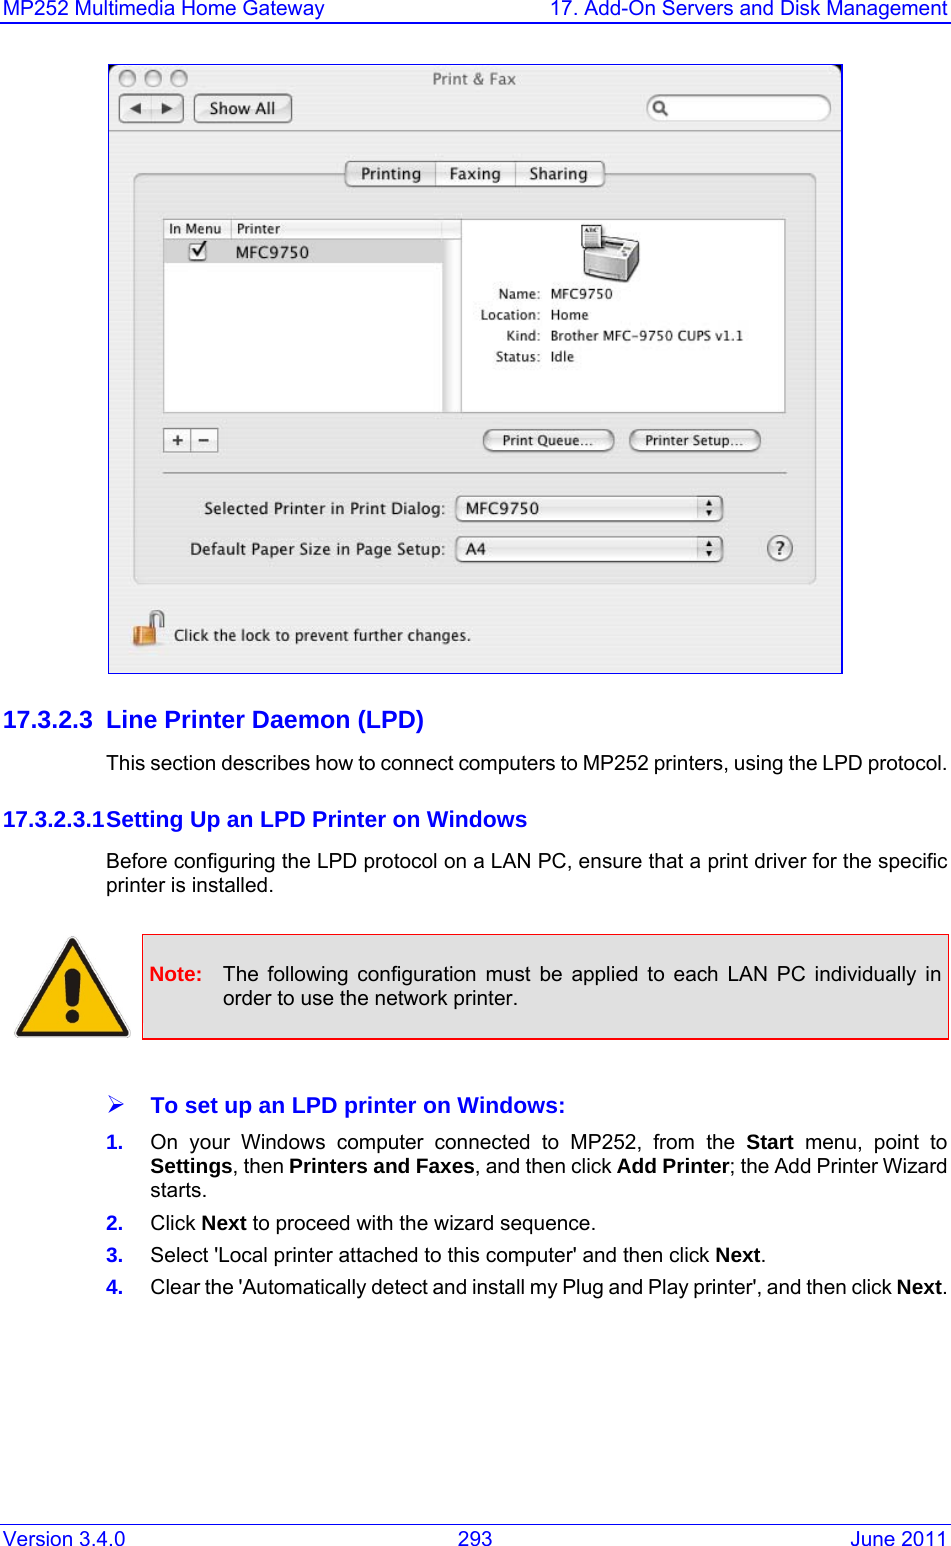 MP252 Multimedia Home Gateway  17. Add-On Servers and Disk Management Version 3.4.0  293  June 2011  17.3.2.3  Line Printer Daemon (LPD) This section describes how to connect computers to MP252 printers, using the LPD protocol.  17.3.2.3.1 Setting Up an LPD Printer on Windows Before configuring the LPD protocol on a LAN PC, ensure that a print driver for the specific printer is installed.   Note:  The following configuration must be applied to each LAN PC individually in order to use the network printer.  ¾ To set up an LPD printer on Windows: 1.  On your Windows computer connected to MP252, from the Start menu, point to Settings, then Printers and Faxes, and then click Add Printer; the Add Printer Wizard starts. 2.  Click Next to proceed with the wizard sequence. 3.  Select &apos;Local printer attached to this computer&apos; and then click Next. 4.  Clear the &apos;Automatically detect and install my Plug and Play printer&apos;, and then click Next. 